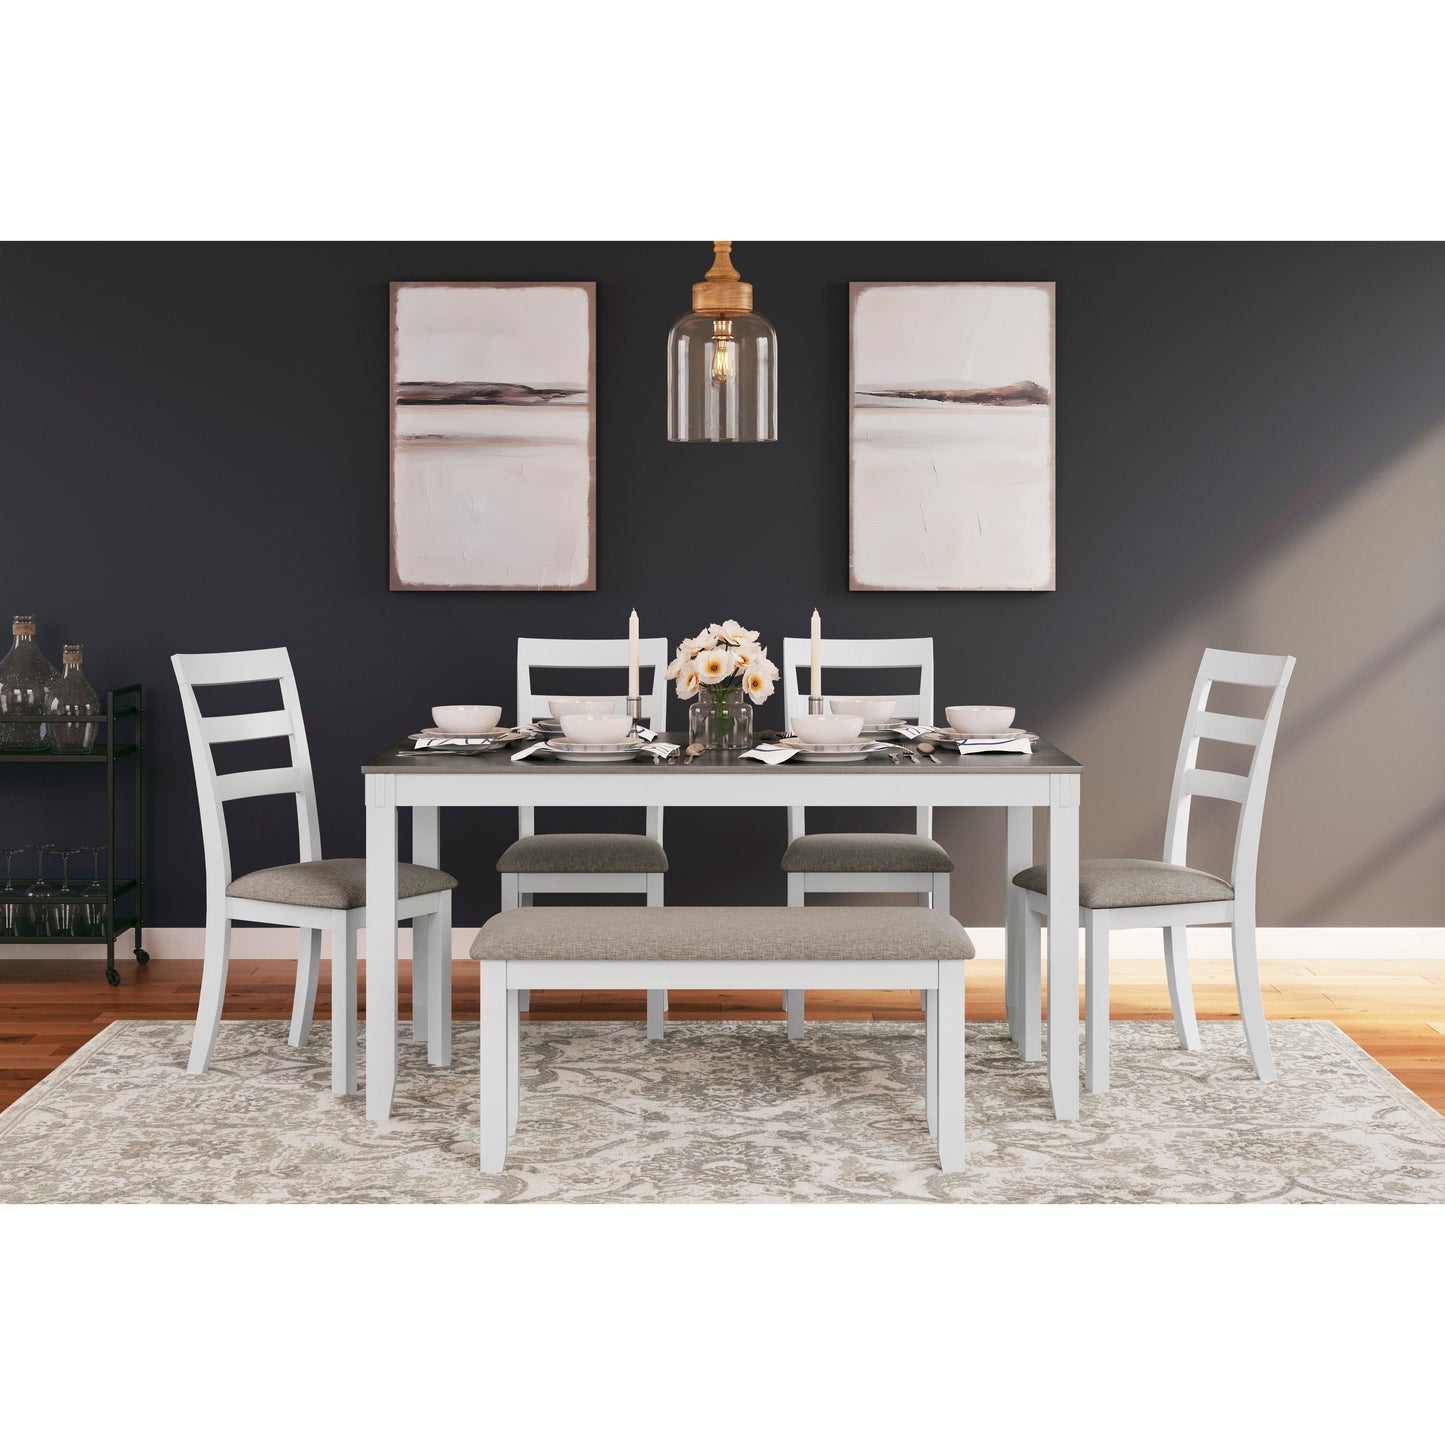 STONEHOLLOW DINING SET - TABLE, 4 CHAIRS & BENCH